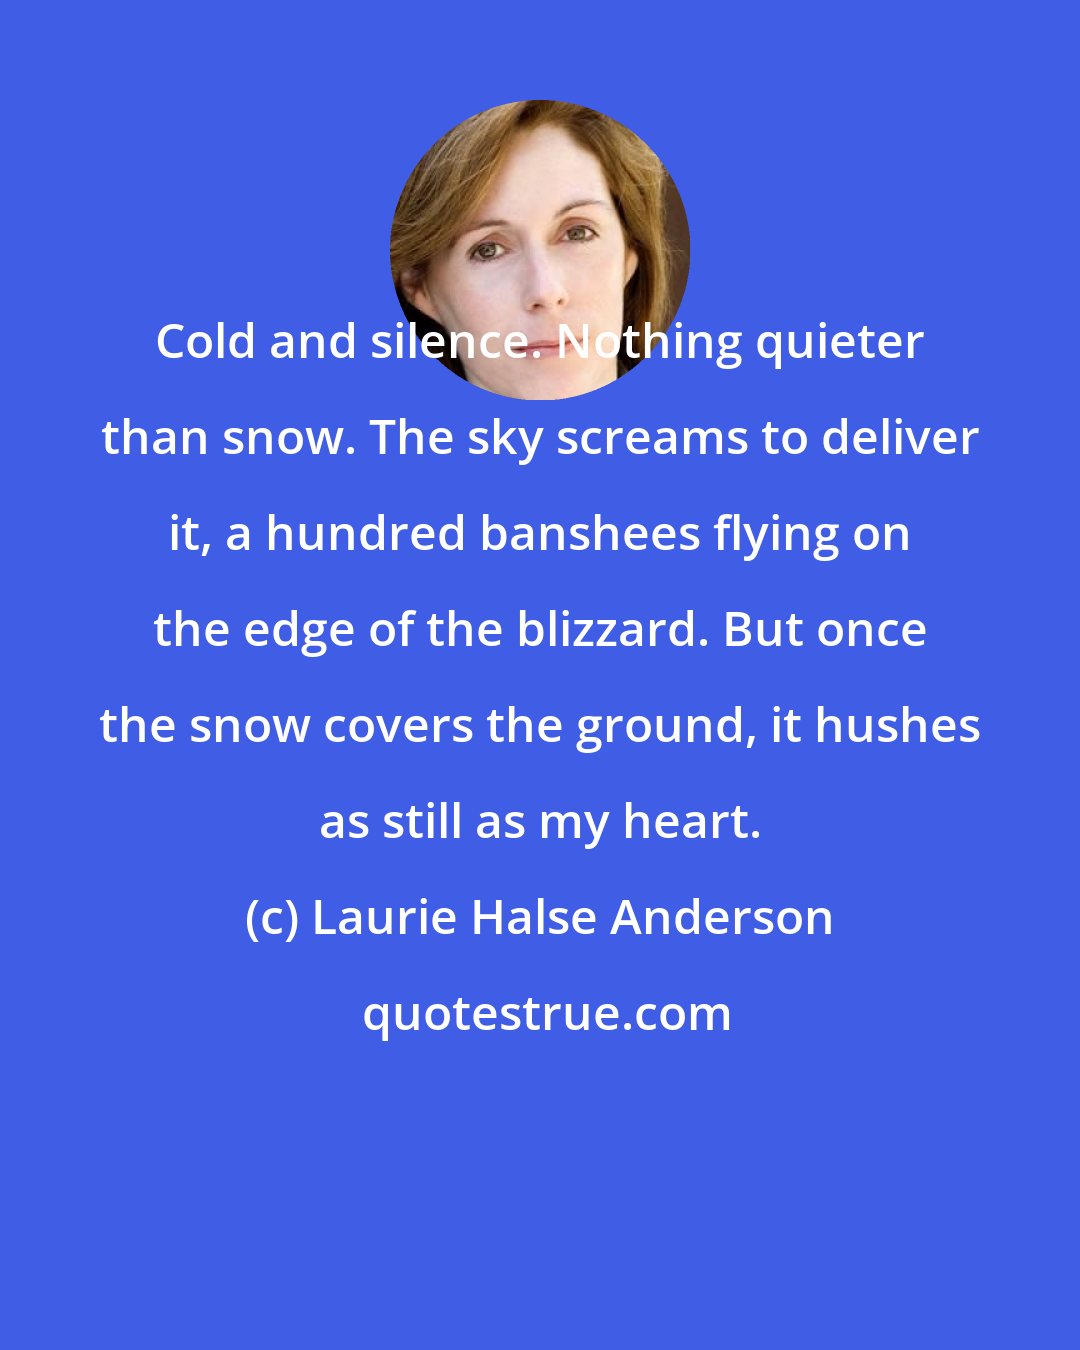 Laurie Halse Anderson: Cold and silence. Nothing quieter than snow. The sky screams to deliver it, a hundred banshees flying on the edge of the blizzard. But once the snow covers the ground, it hushes as still as my heart.